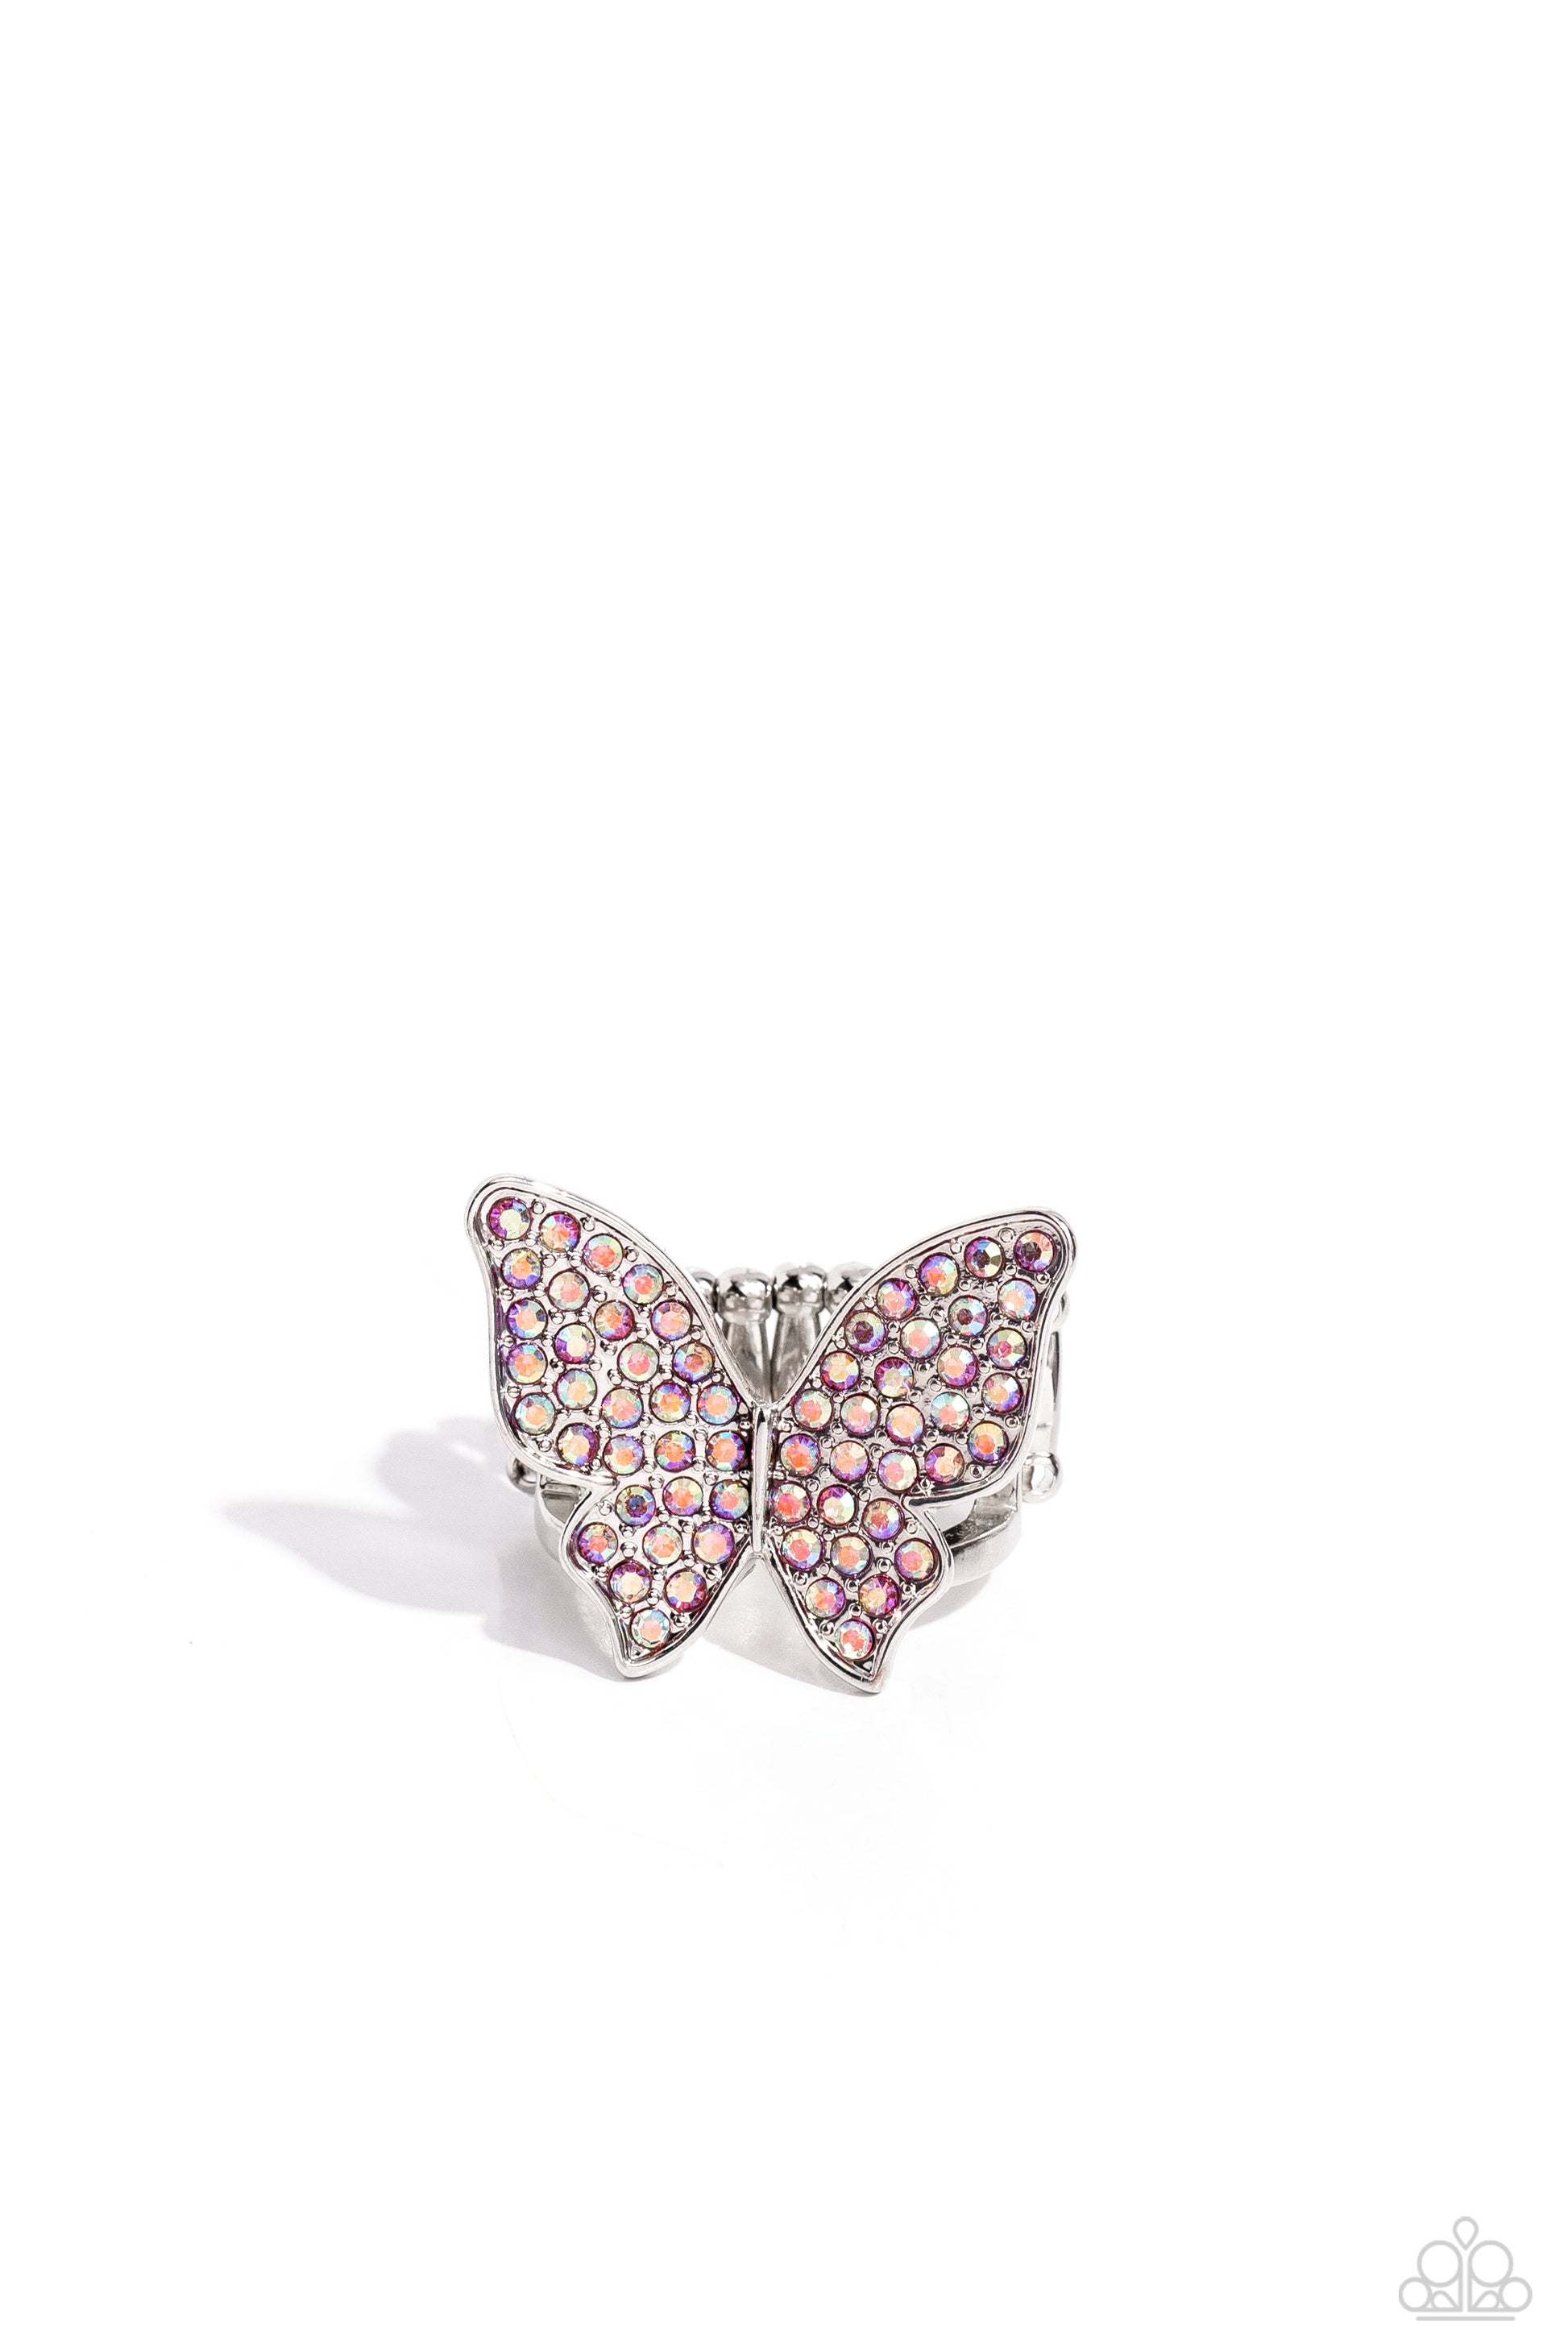 Ring, Sensitive Skin, Hypoallergenic Jewelry, pink, butterfly